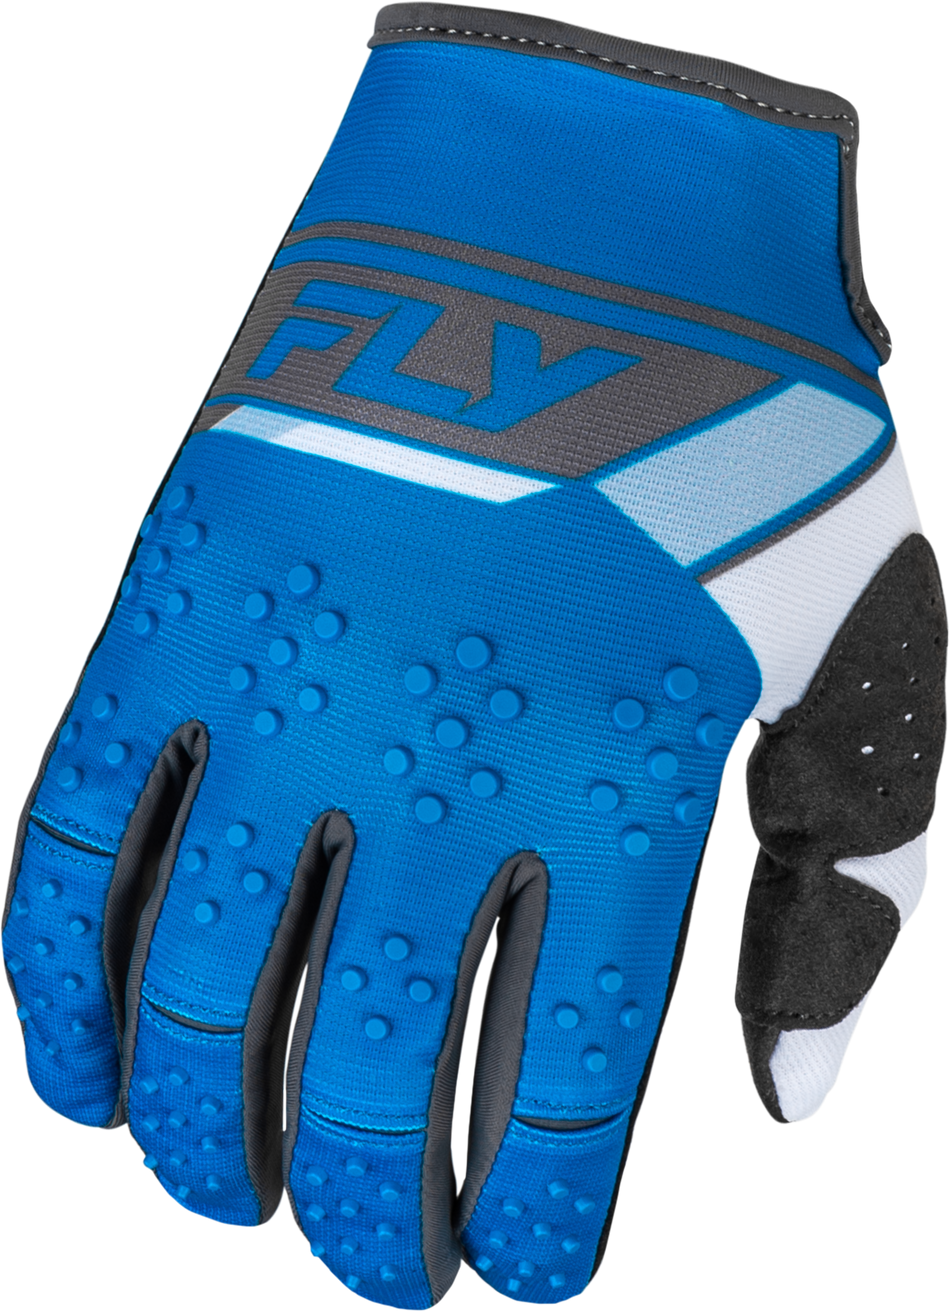 FLY RACING Kinetic Prix Gloves Bright Blue/Charcoal 3x 377-4103X